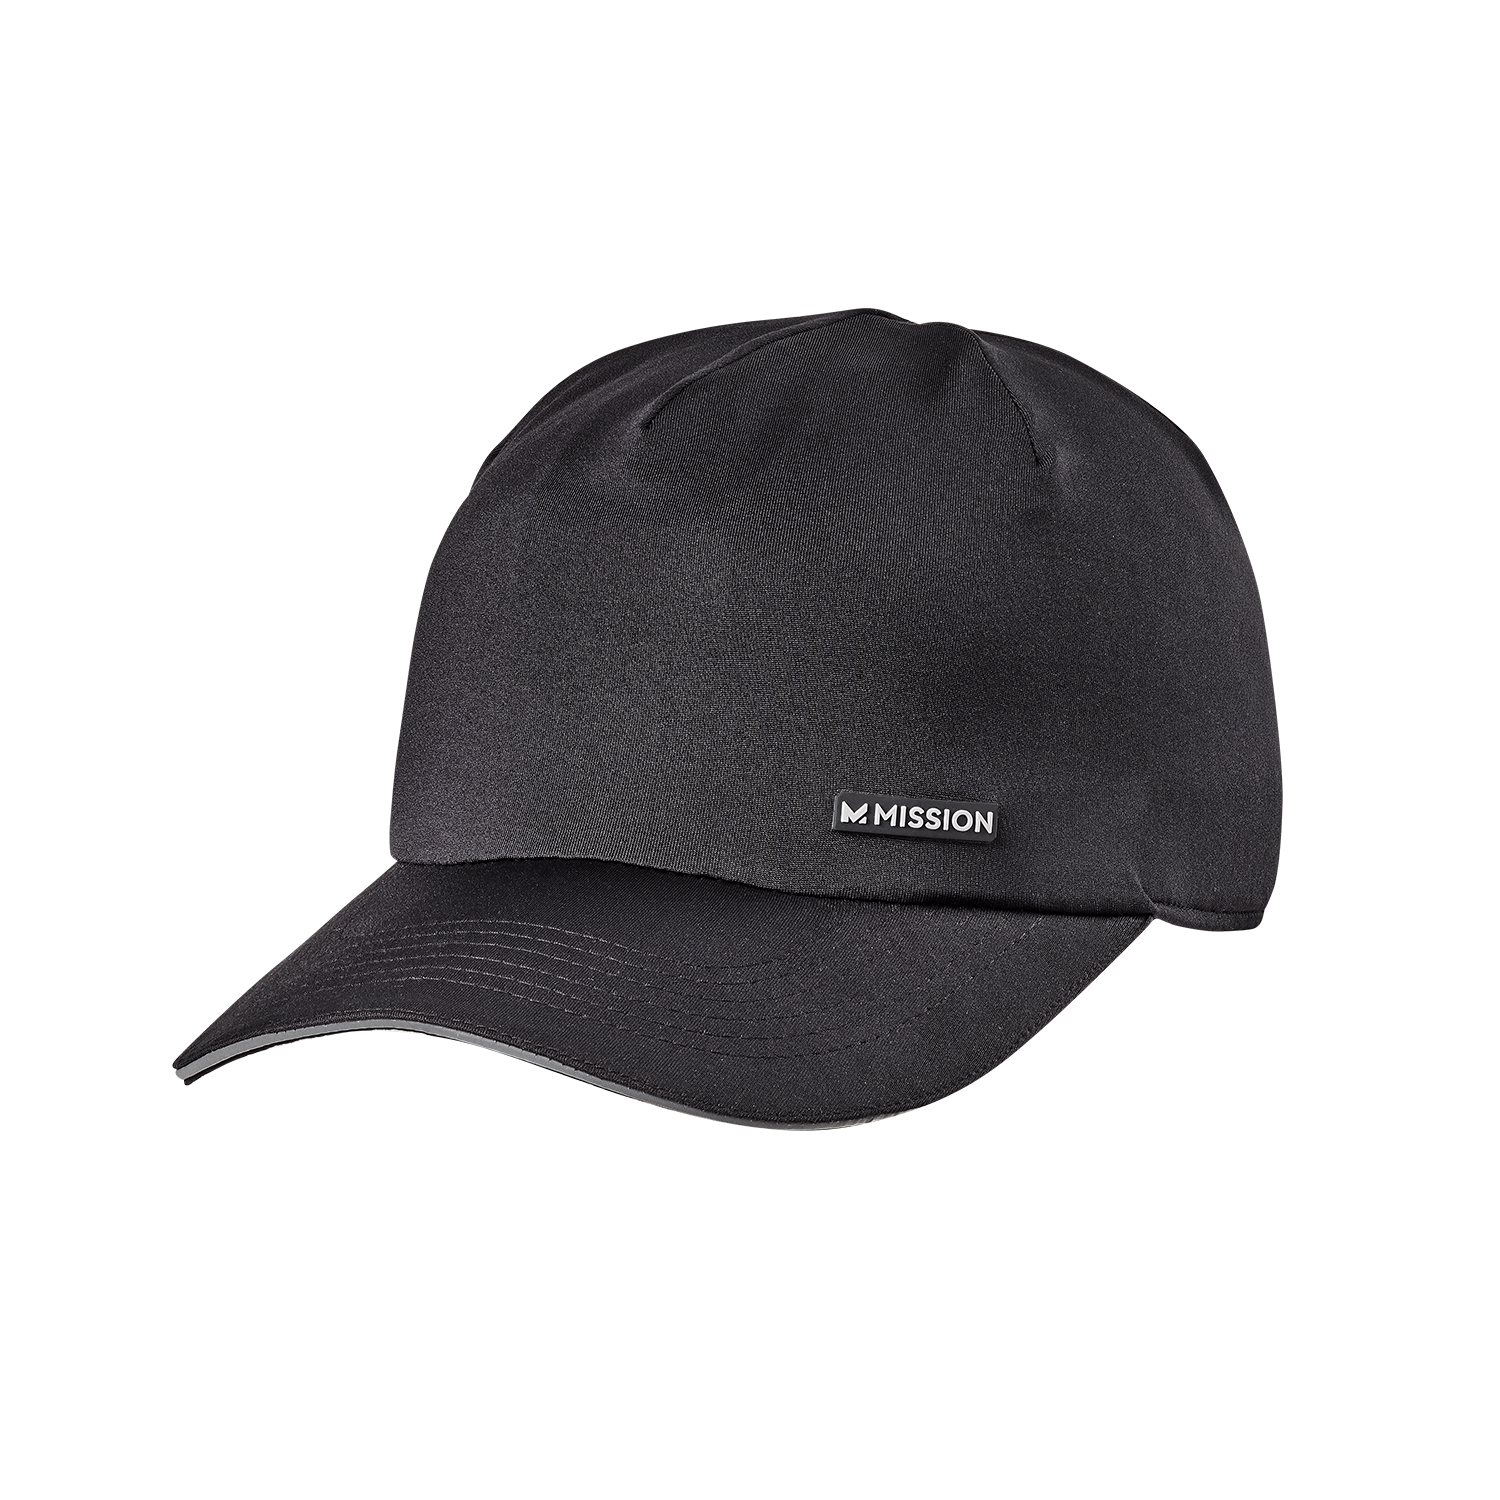 MISSION Cooling Performance Hat- Unisex Baseball Cap, Cools When